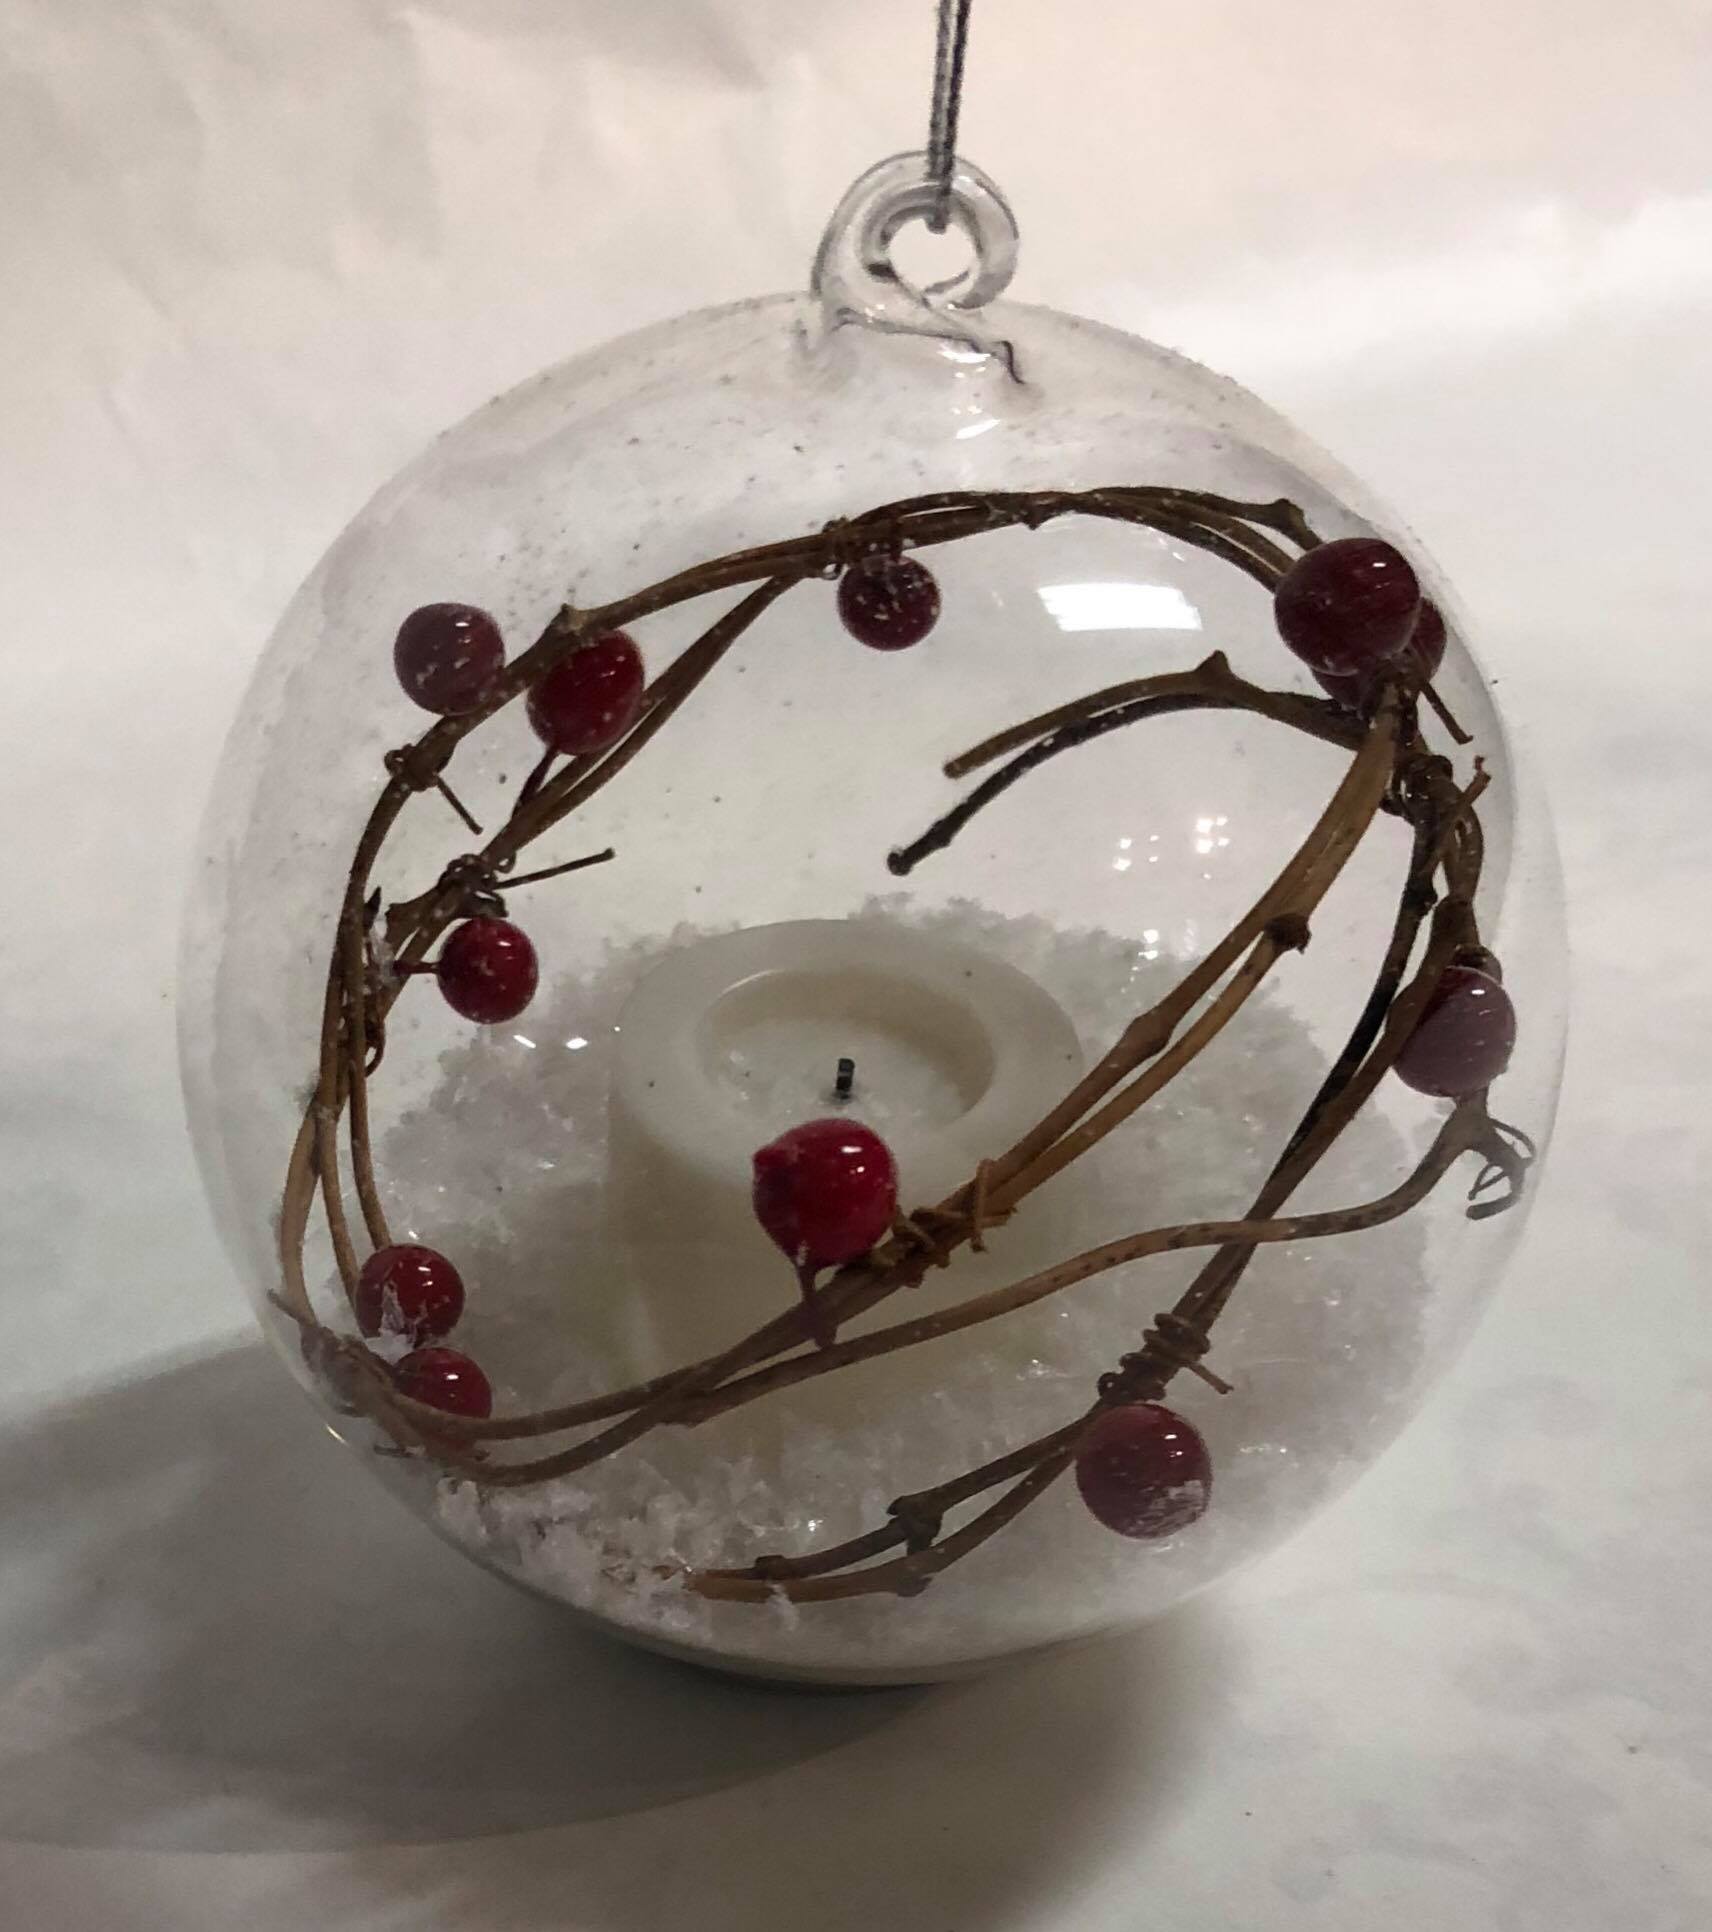 Glass Ornament with white candle -snow, red berries and branches